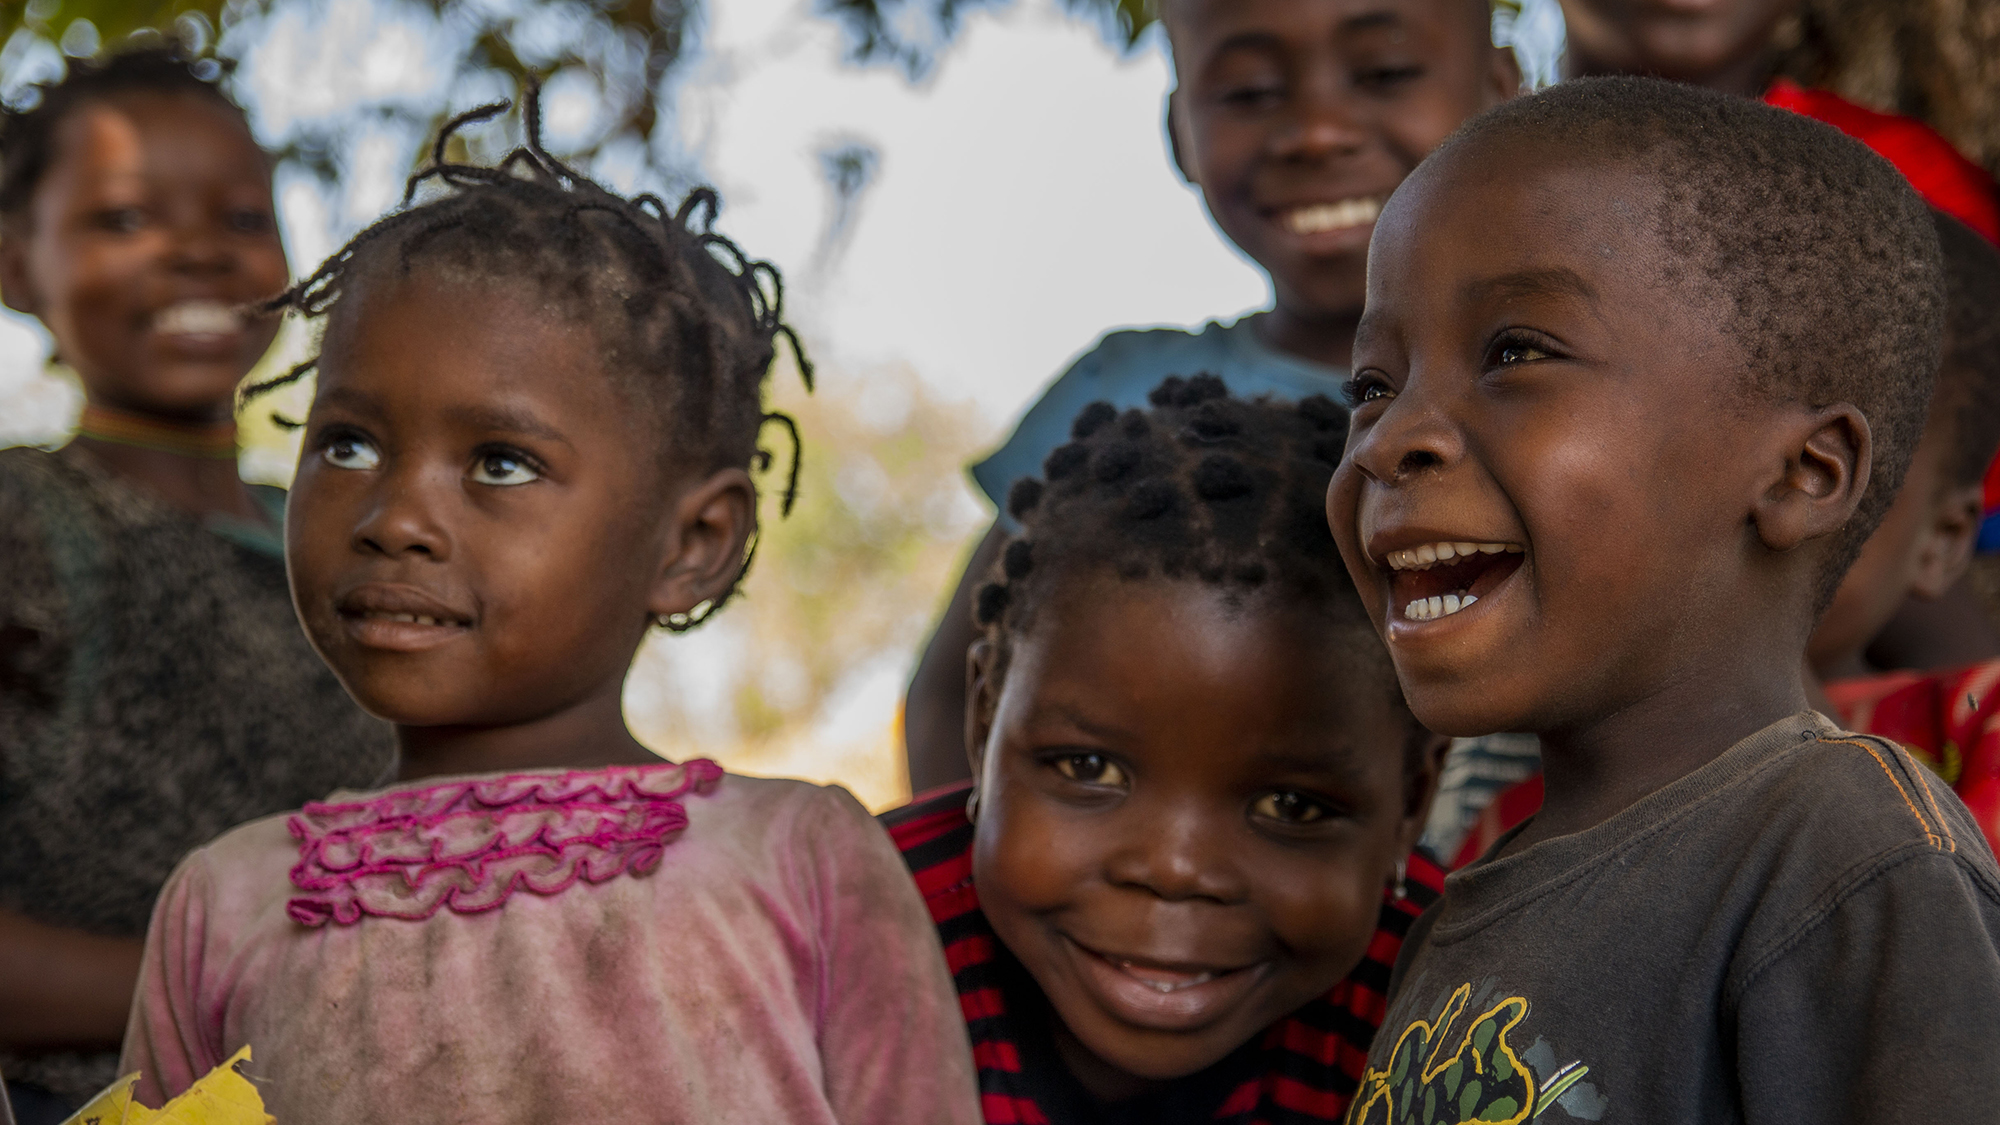 A group of children in Mozambique.